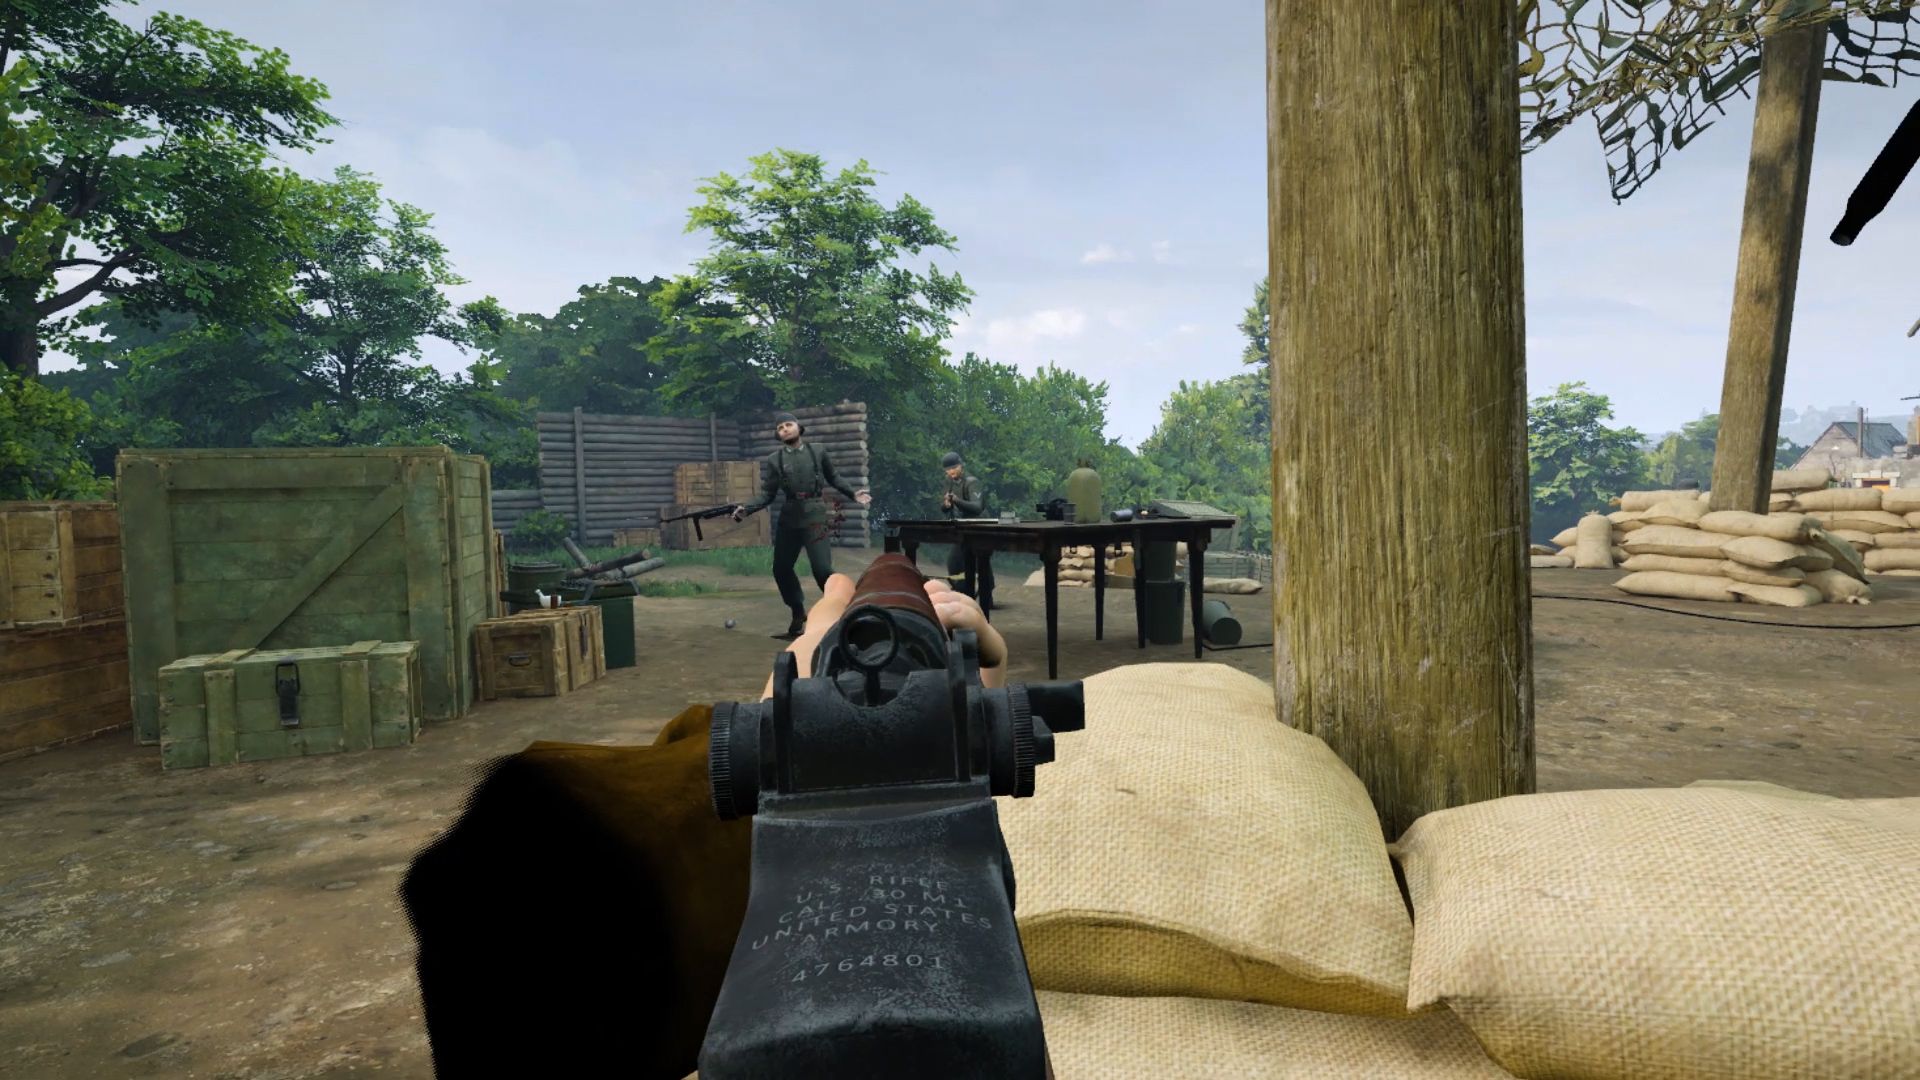 Medal of Honor: Above and Beyond is an Oculus VR Game Developed by Respawn. Den of Geek